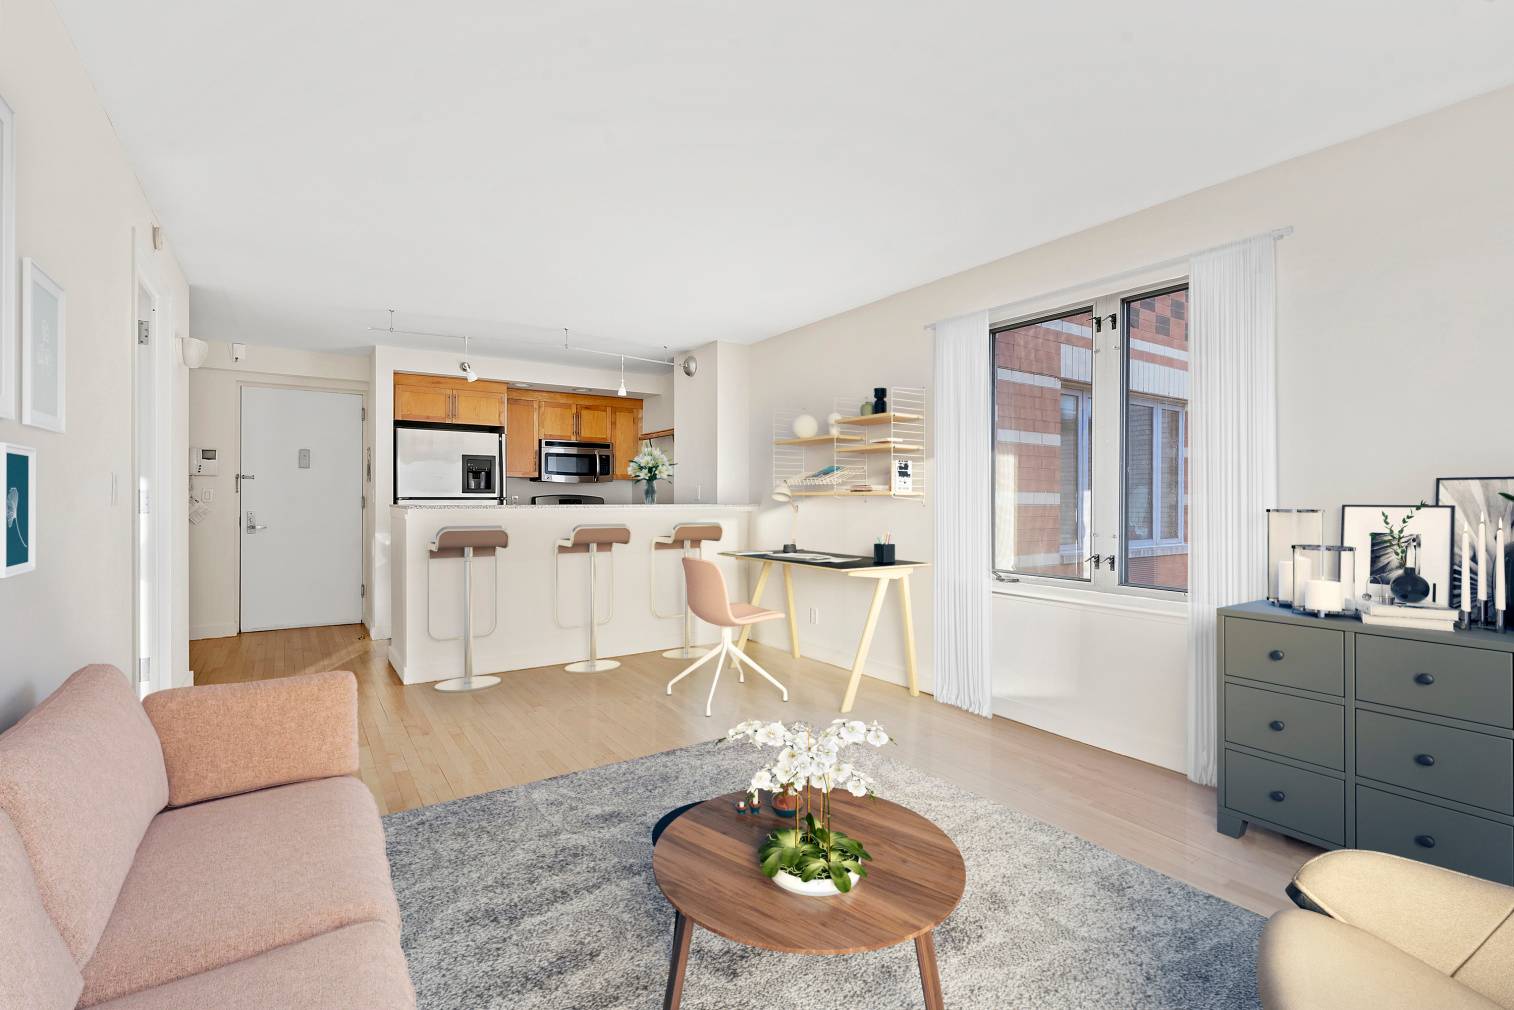 This sun drenched top floor, 1 bed, 1 bath condo in Downtown Brooklyn is a splendid space to call home and a tremendous value too.